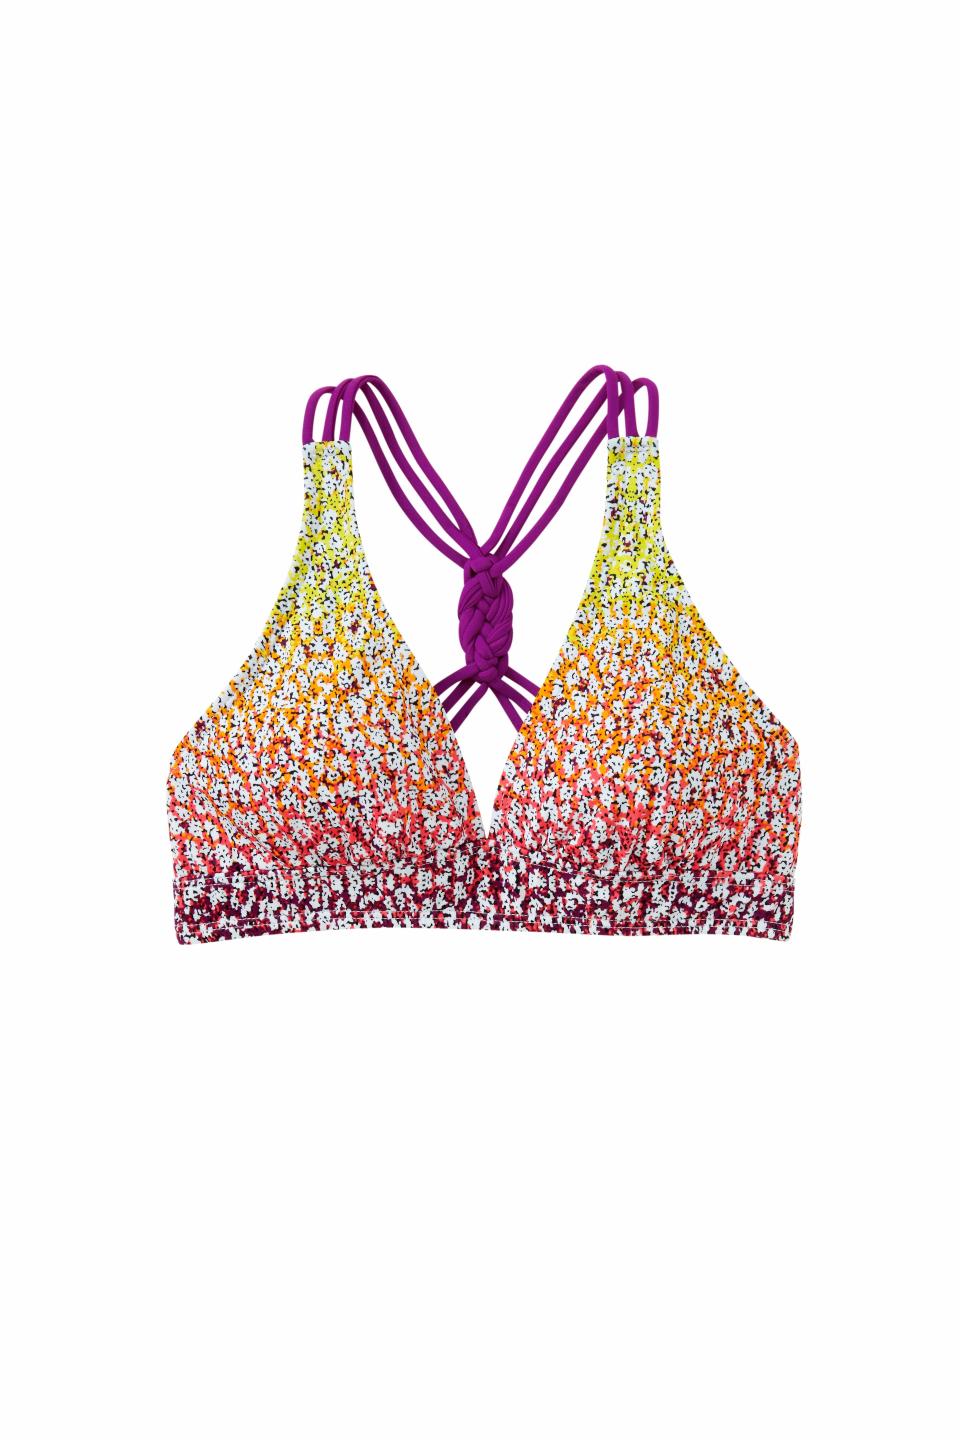 This product image released by Athleta shows a bikini top. Swim separates, including bikini and tankini tops, and brief, bikini and short-style bottoms, were introduced into wide distribution several years ago. They were intended to solve a practical problem when consumers needed a bigger top or bigger bottom, but women have since started using them to make a style statement. (AP Photo/Athleta)